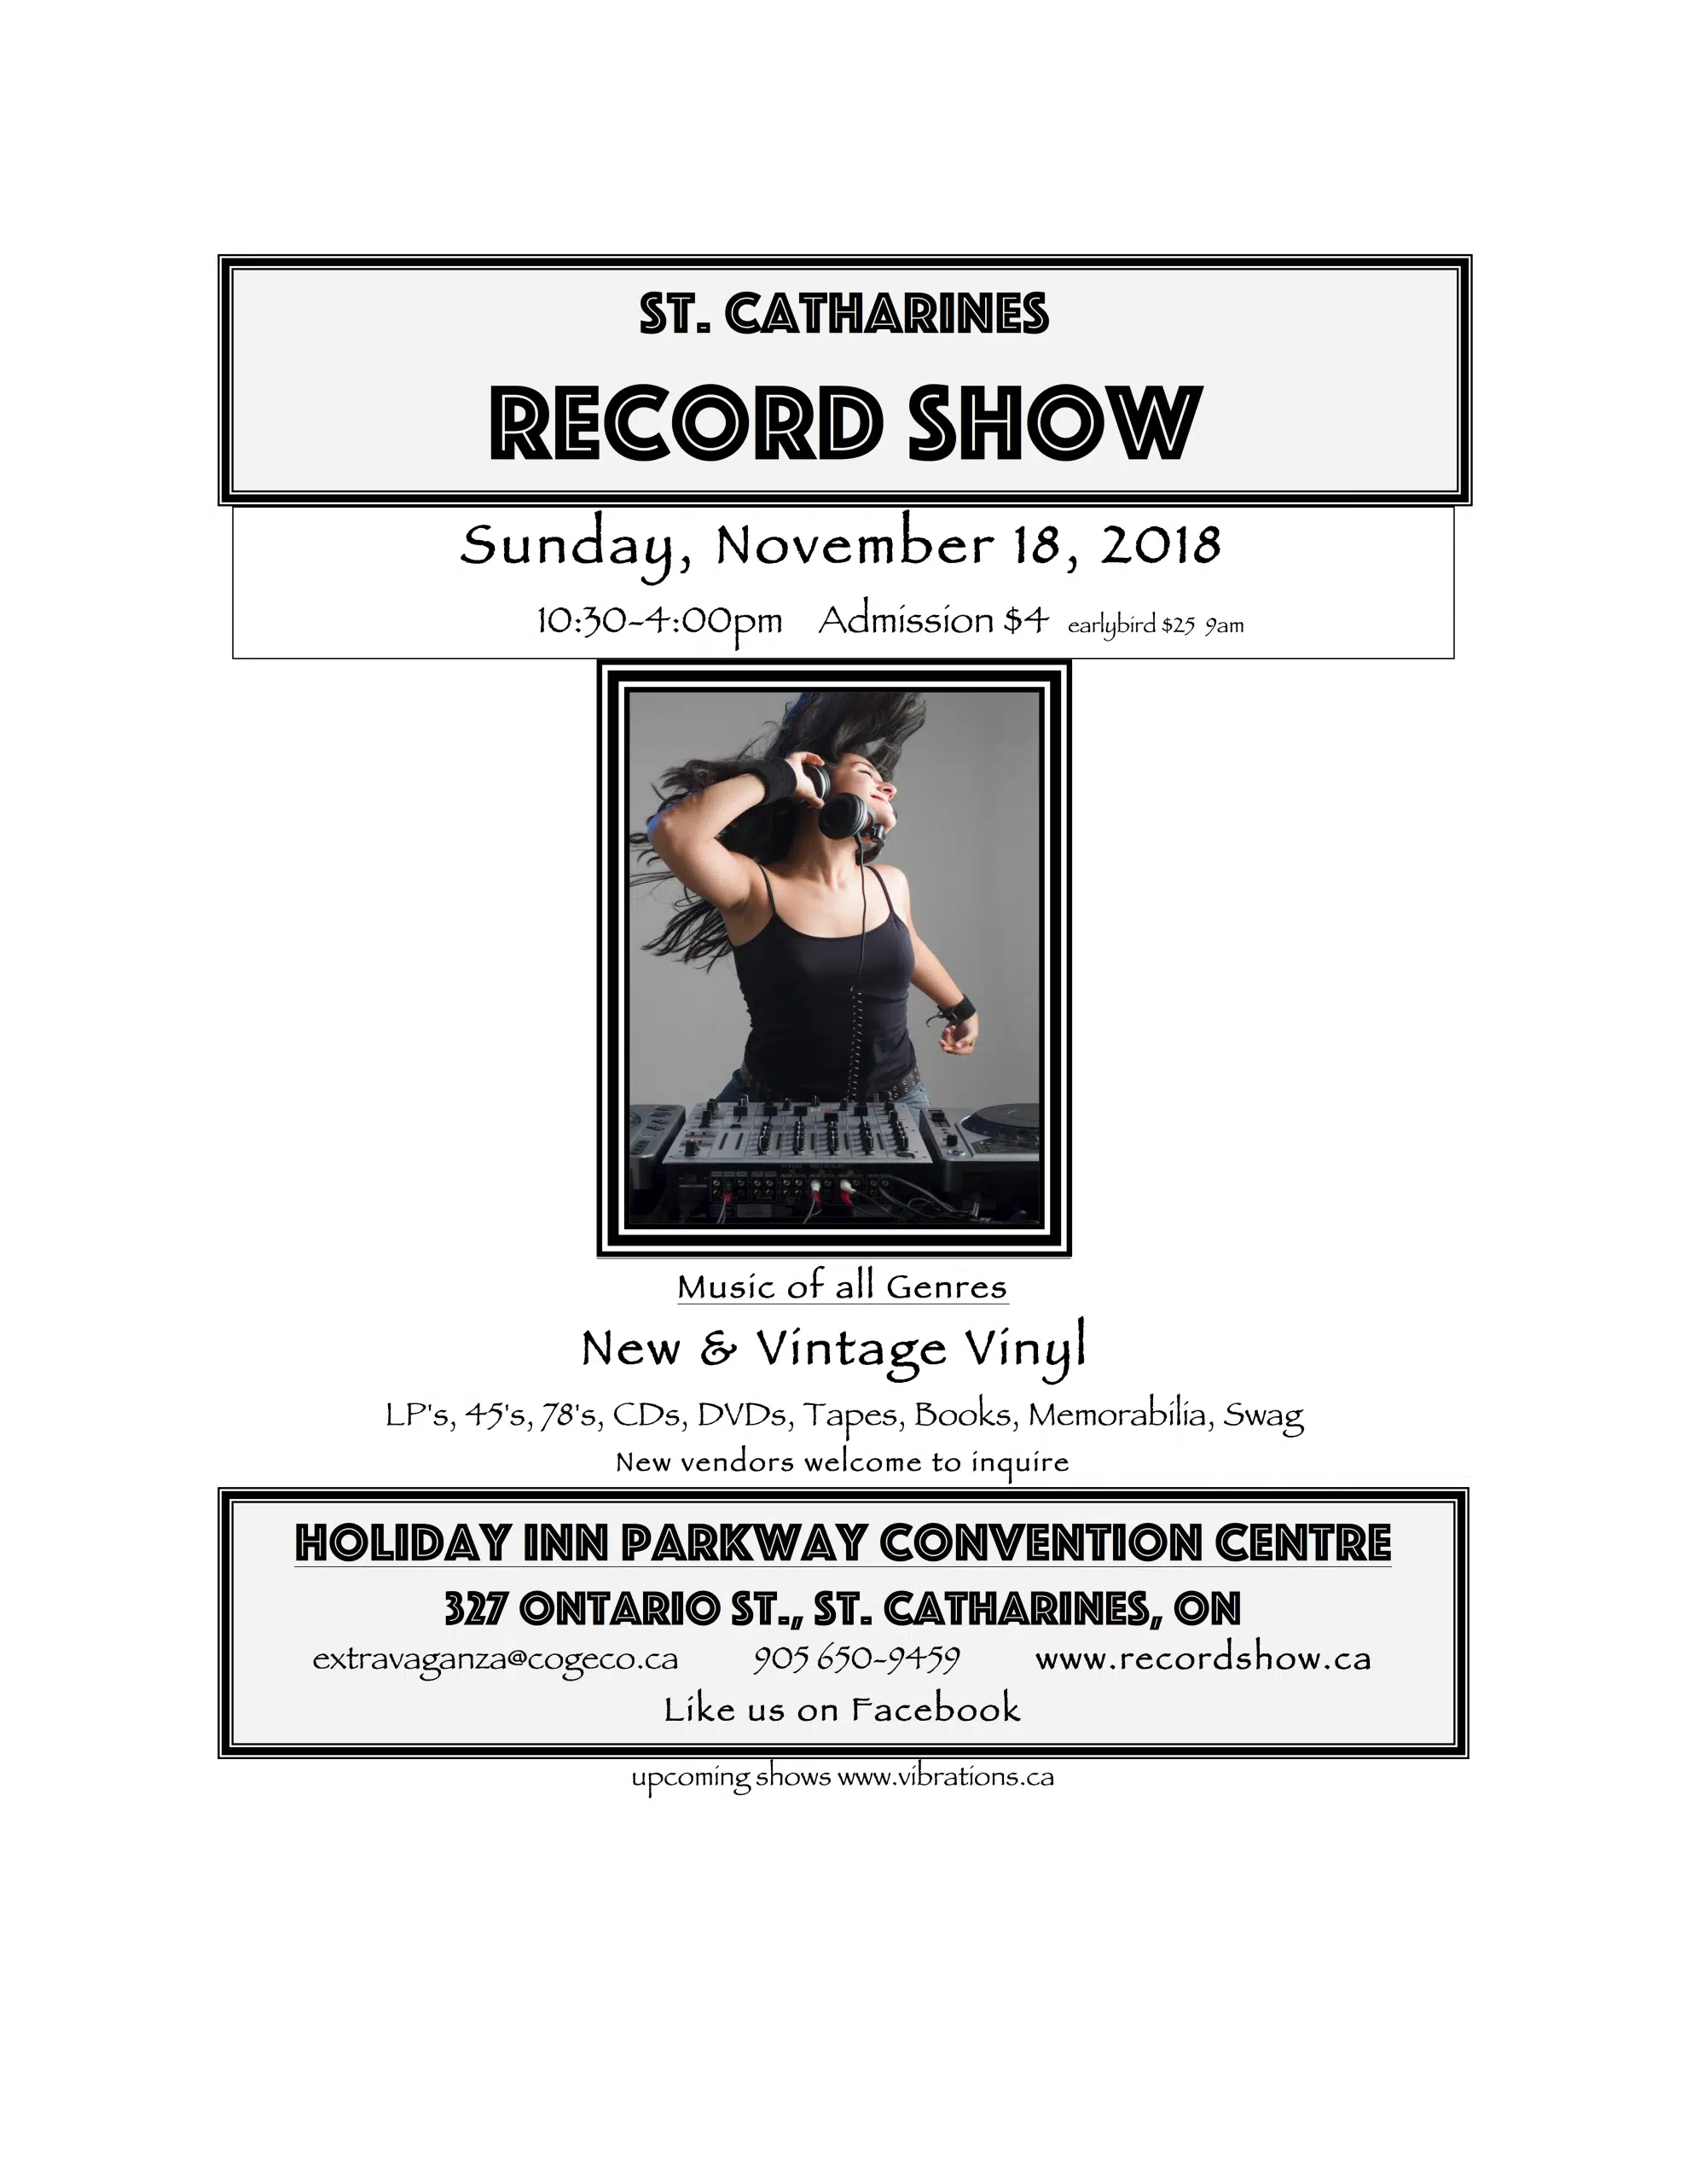 St Catharines Record Show